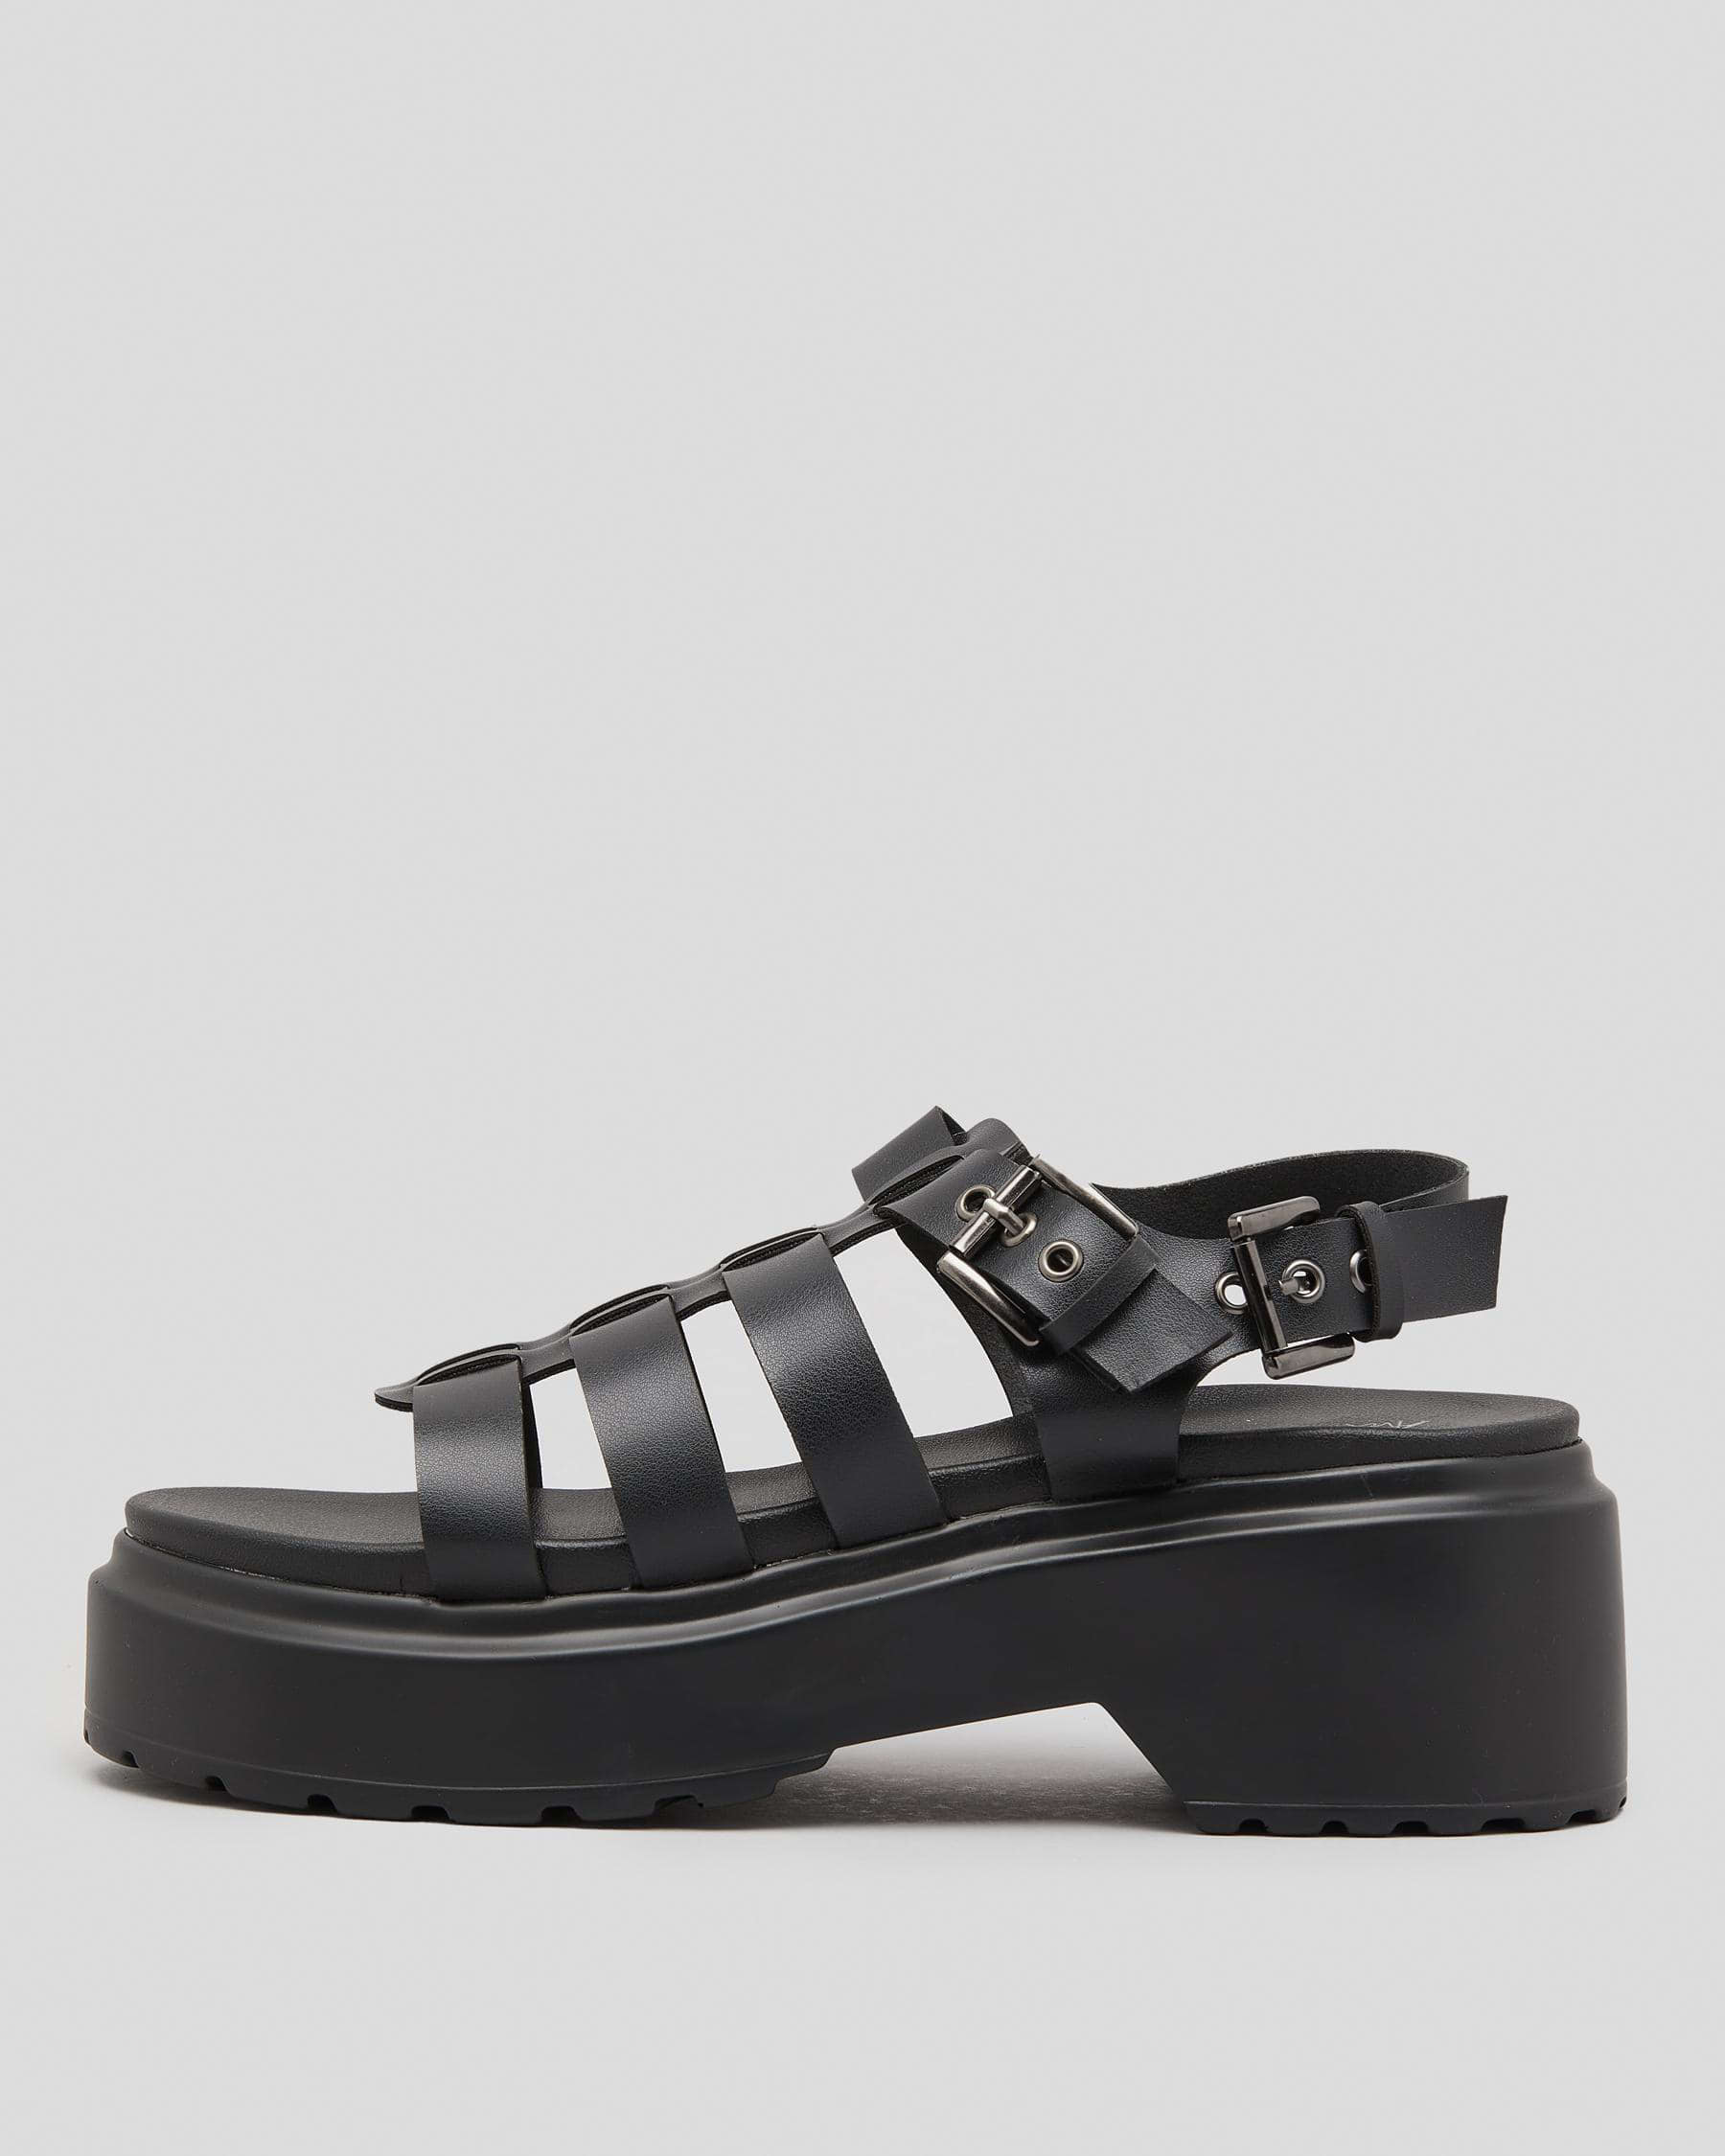 Ava And Ever Nova Flatform Shoes In Black - Fast Shipping & Easy ...